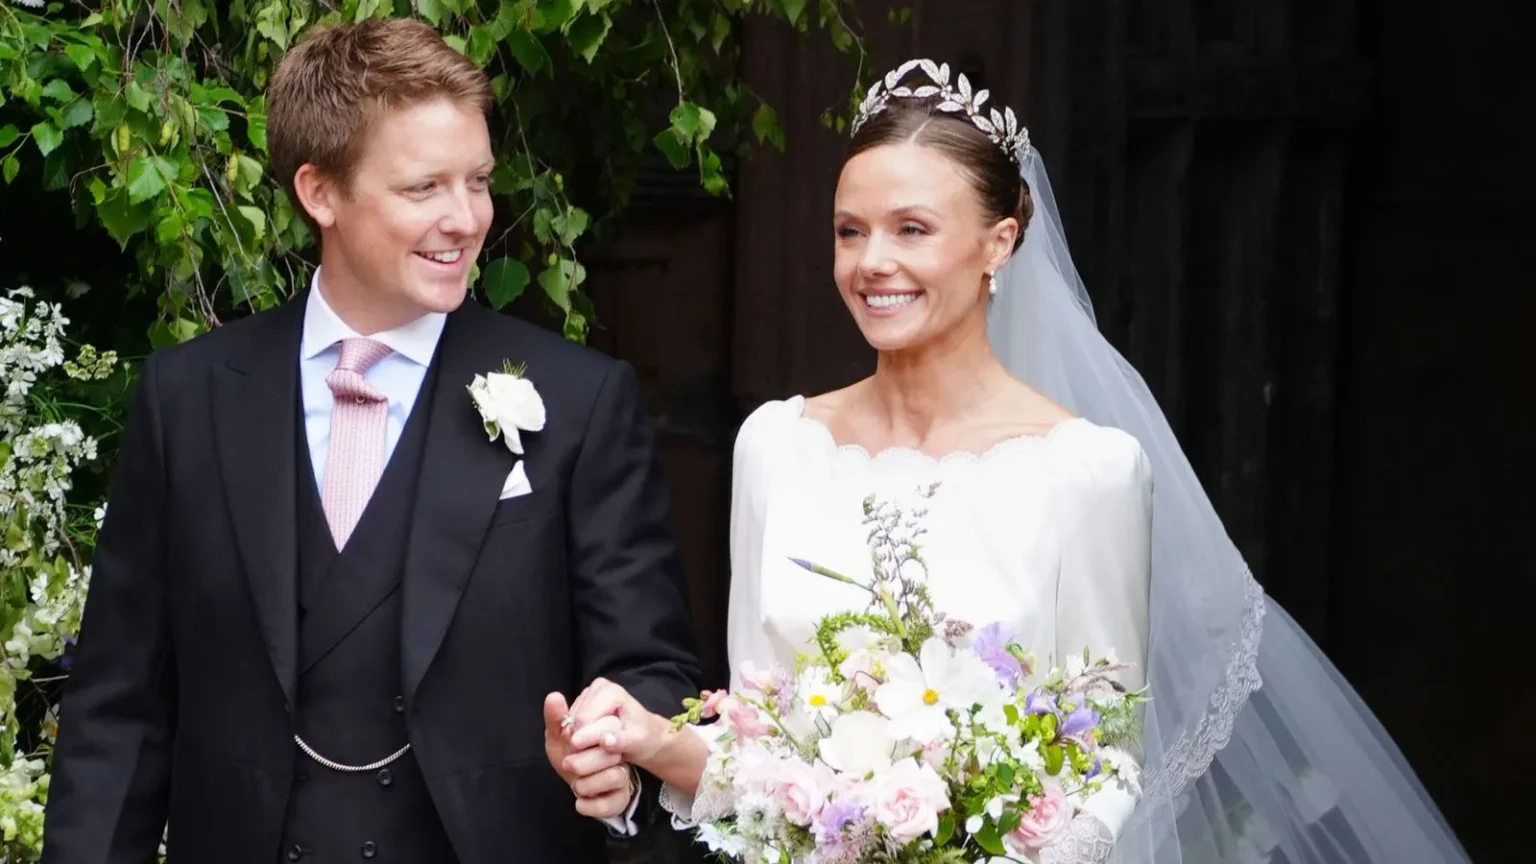 duke-and-duchess-of-westminster-make-stunning-appearance-as-newlyweds